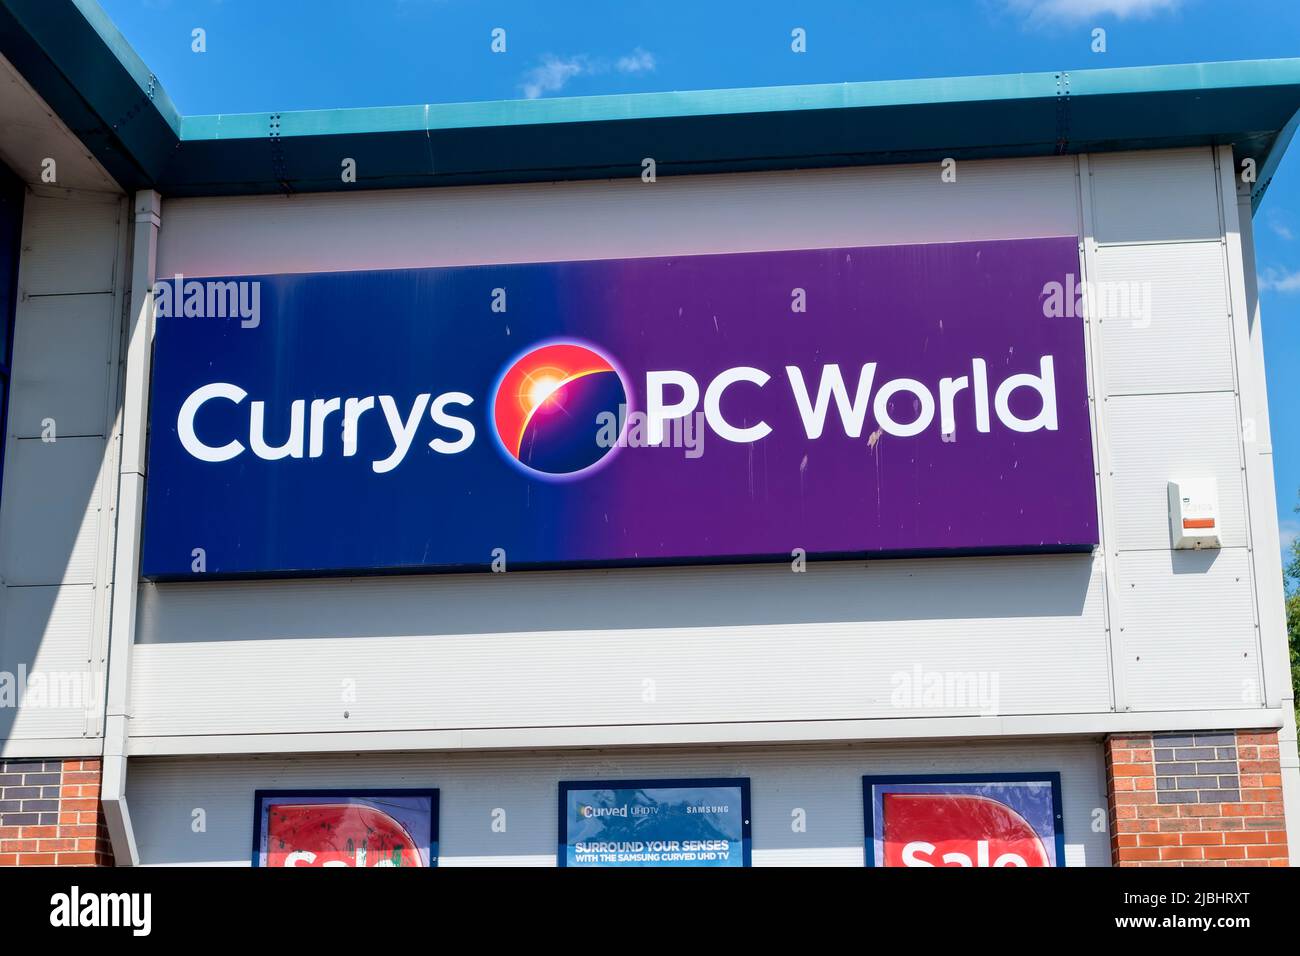 Trowbridge, Wiltshire, UK - July 15 2014: Currys PC World Store Sign at the Spitfire Retail Park in Trowbridge, Wiltshire, England, UK Stock Photo